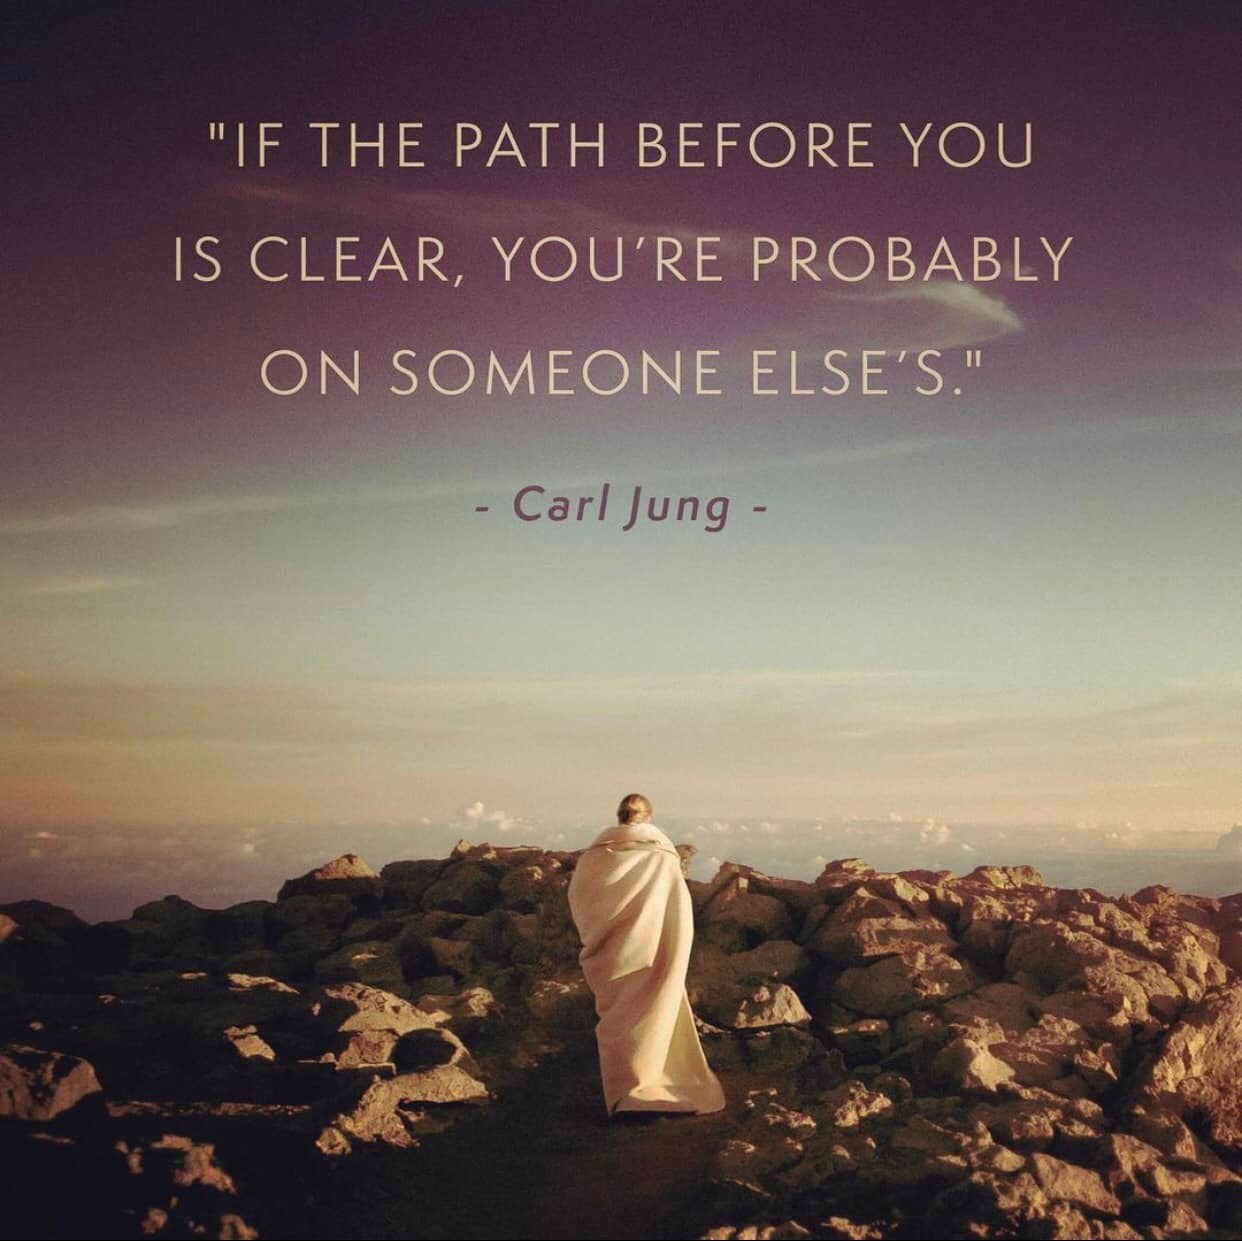 If the path before you is clear, you’re probably on someone else’s.